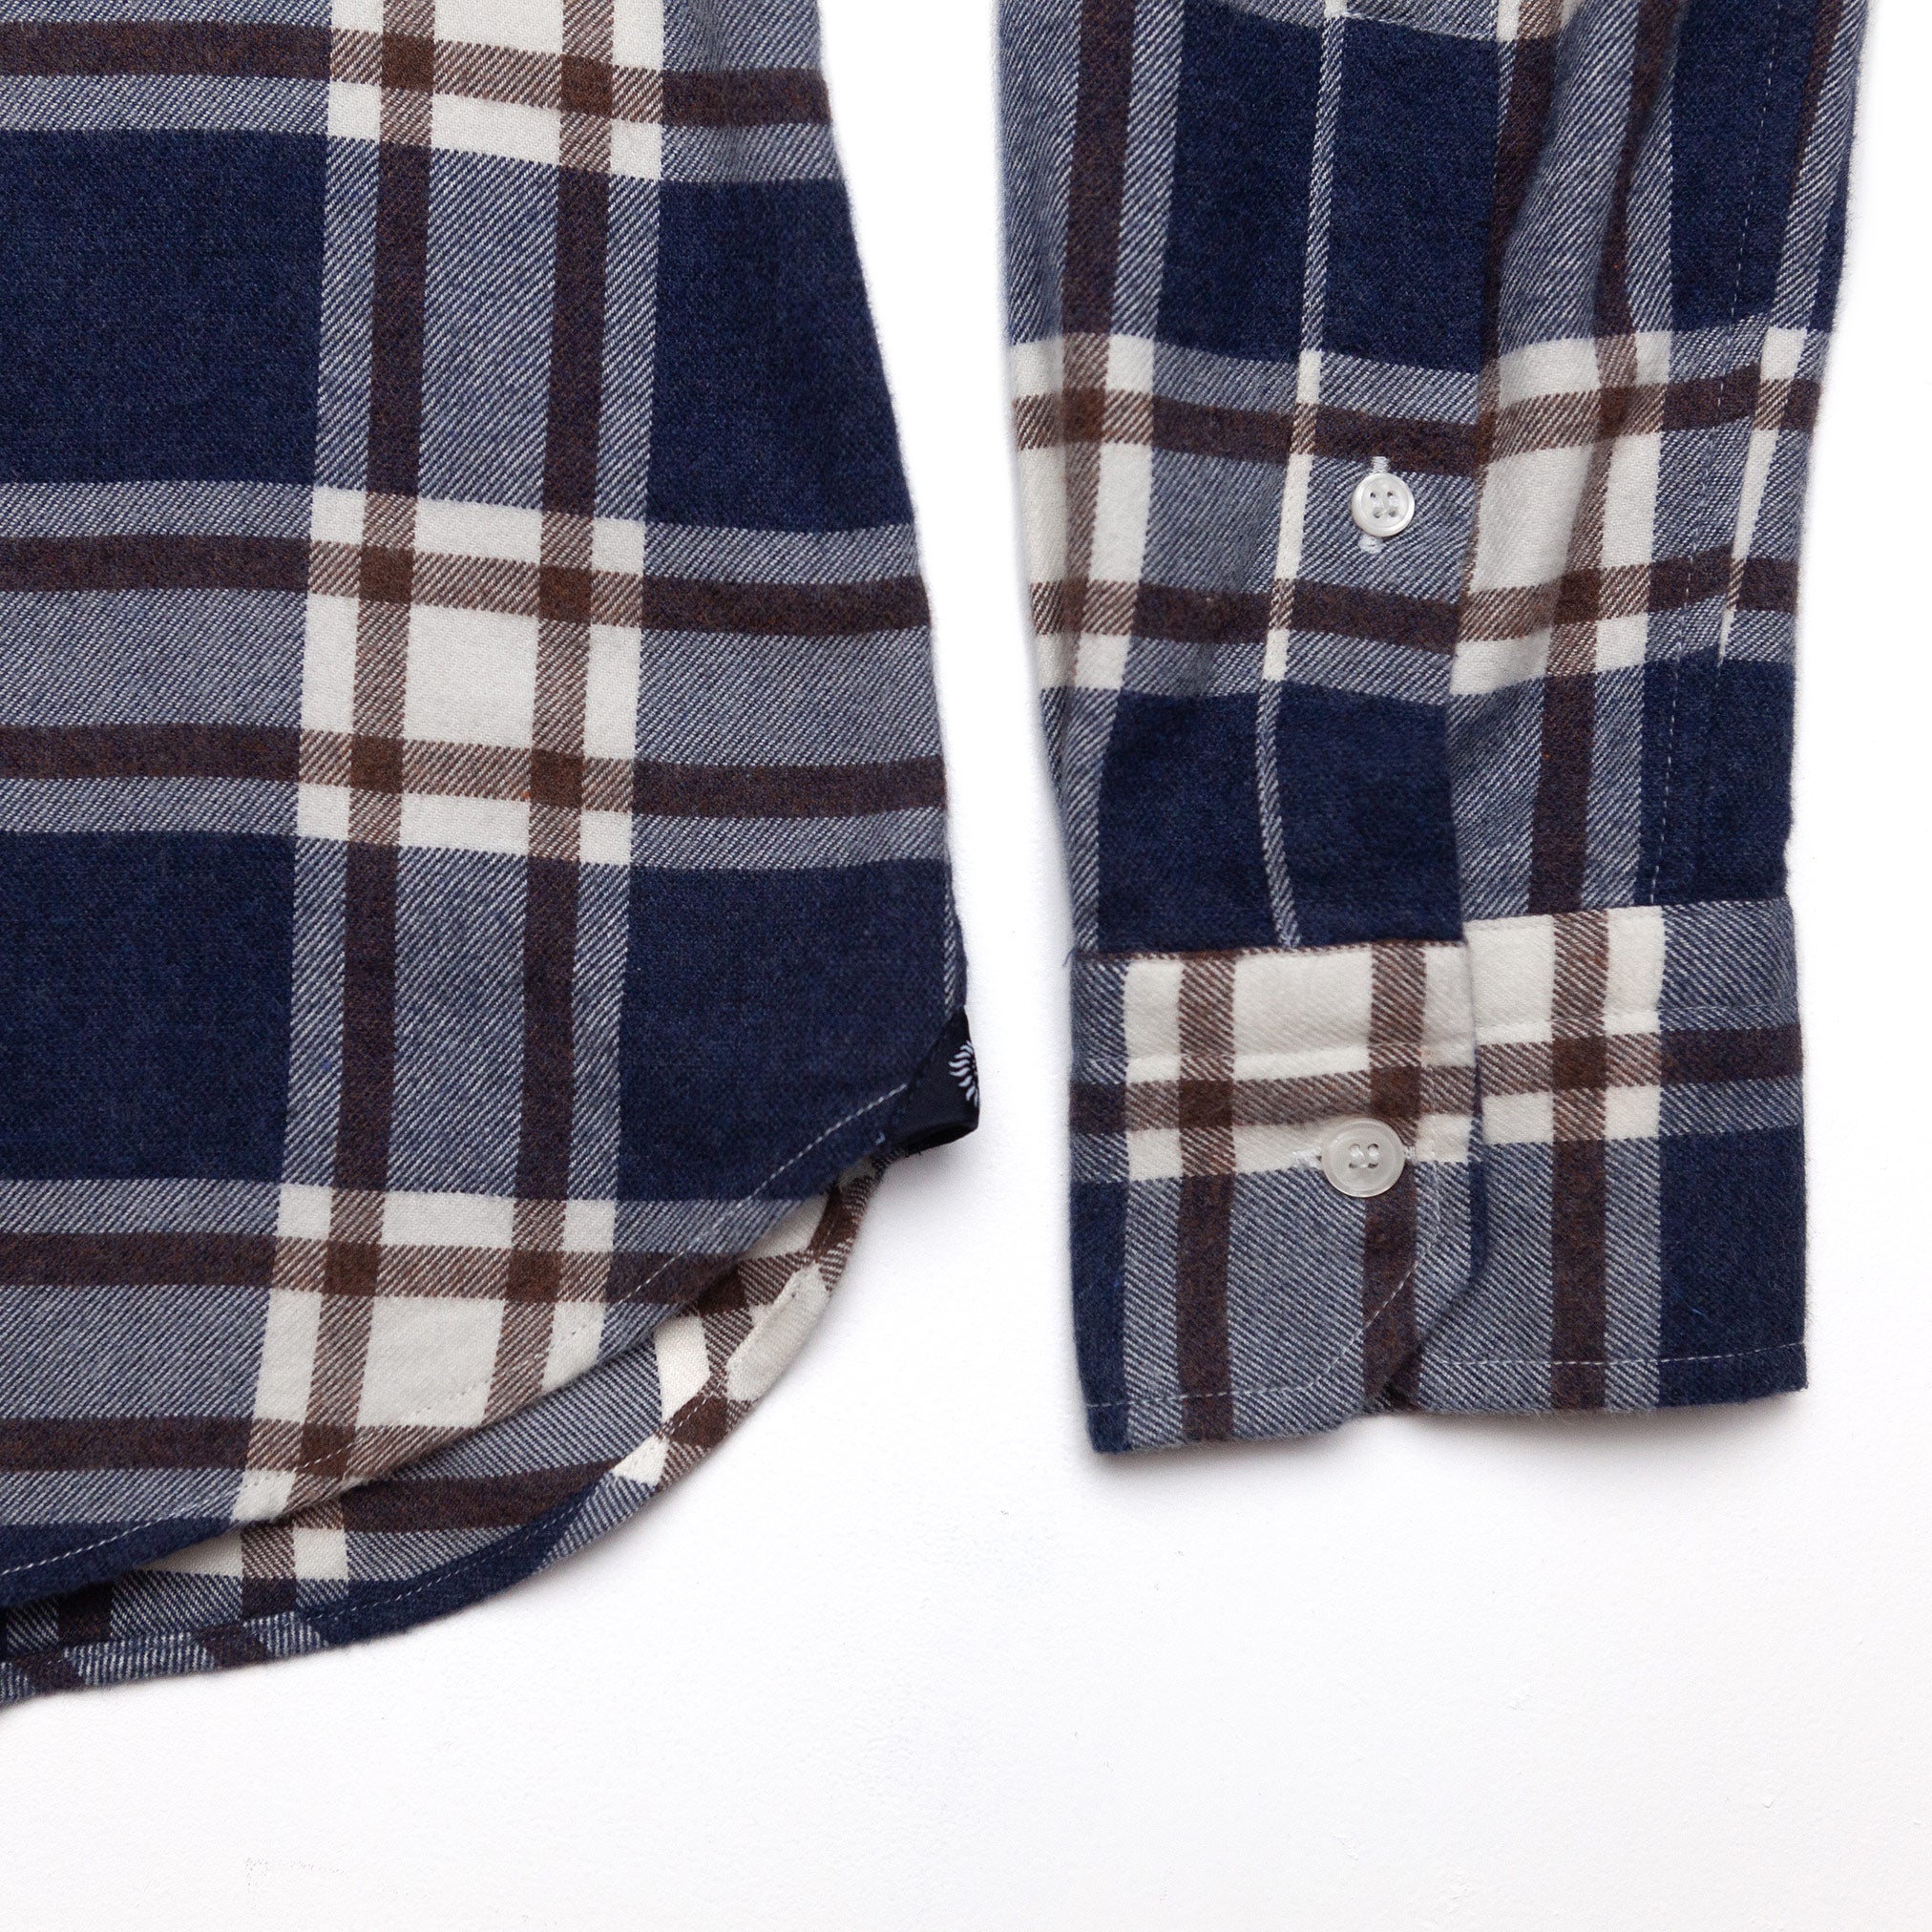 Brushed Flannel Shirt in Brown & Navy Plaid